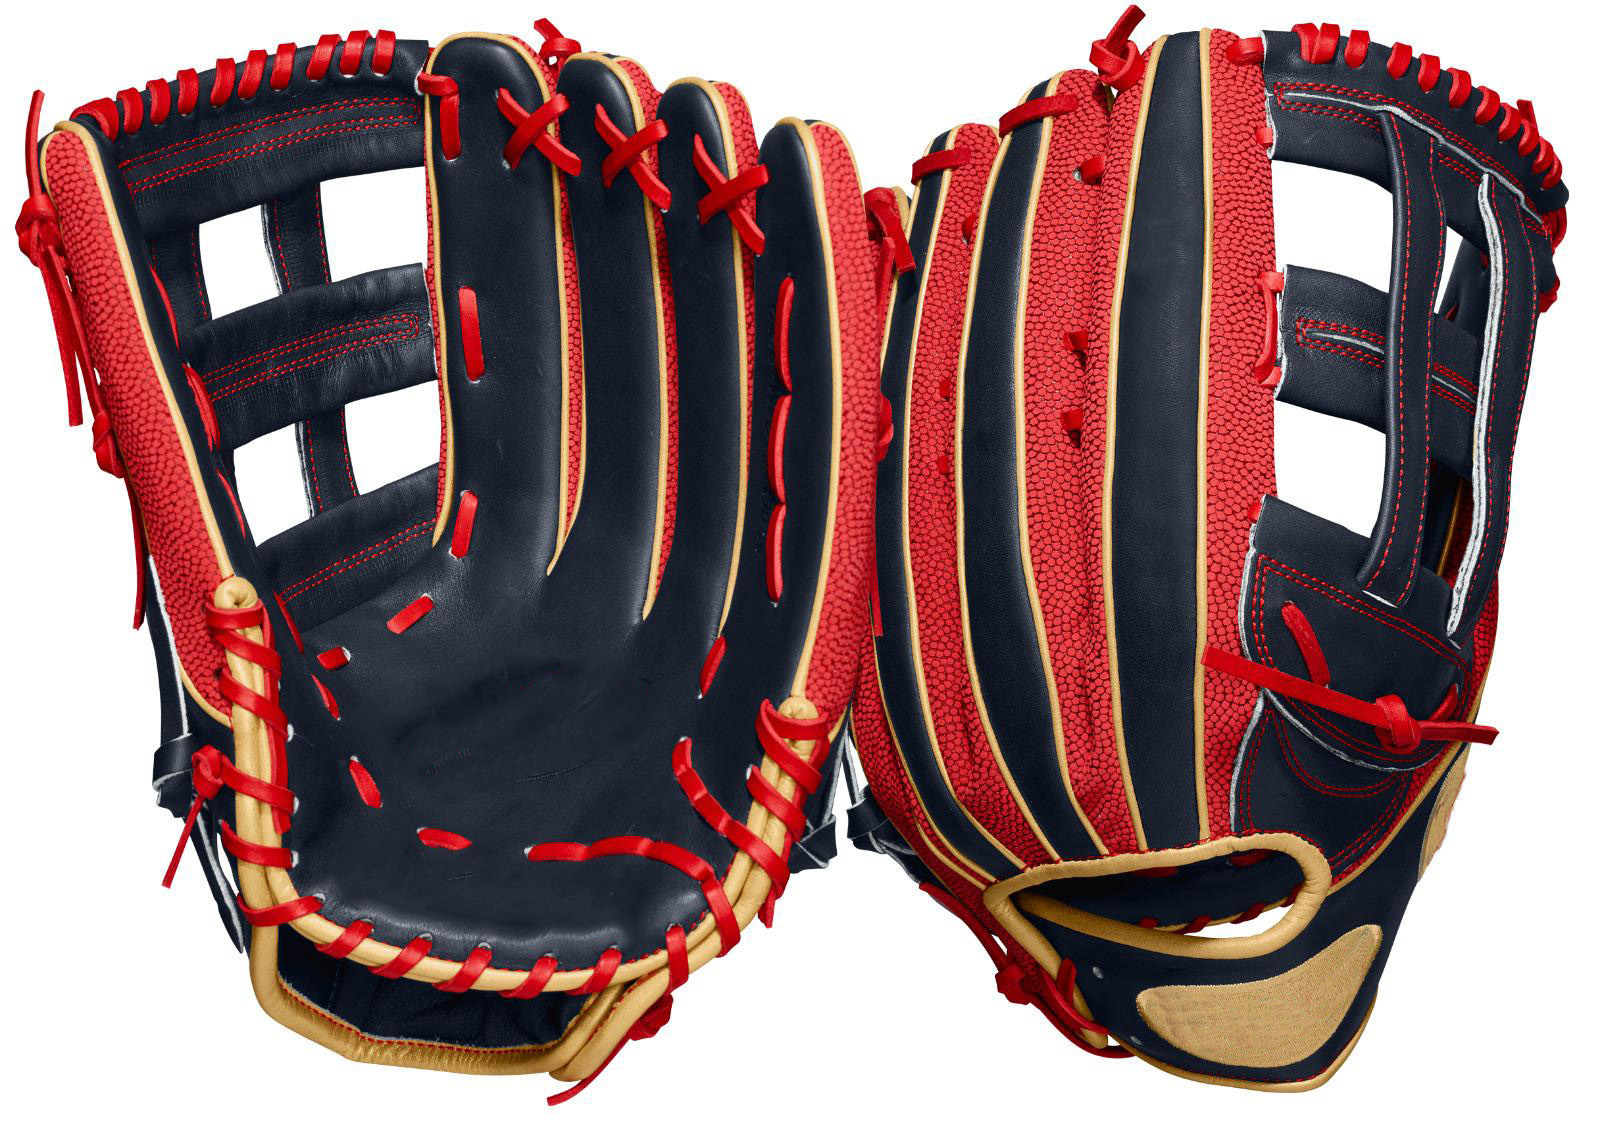 cowskin leather 11.5" Full leather black and red infield baseball gloves